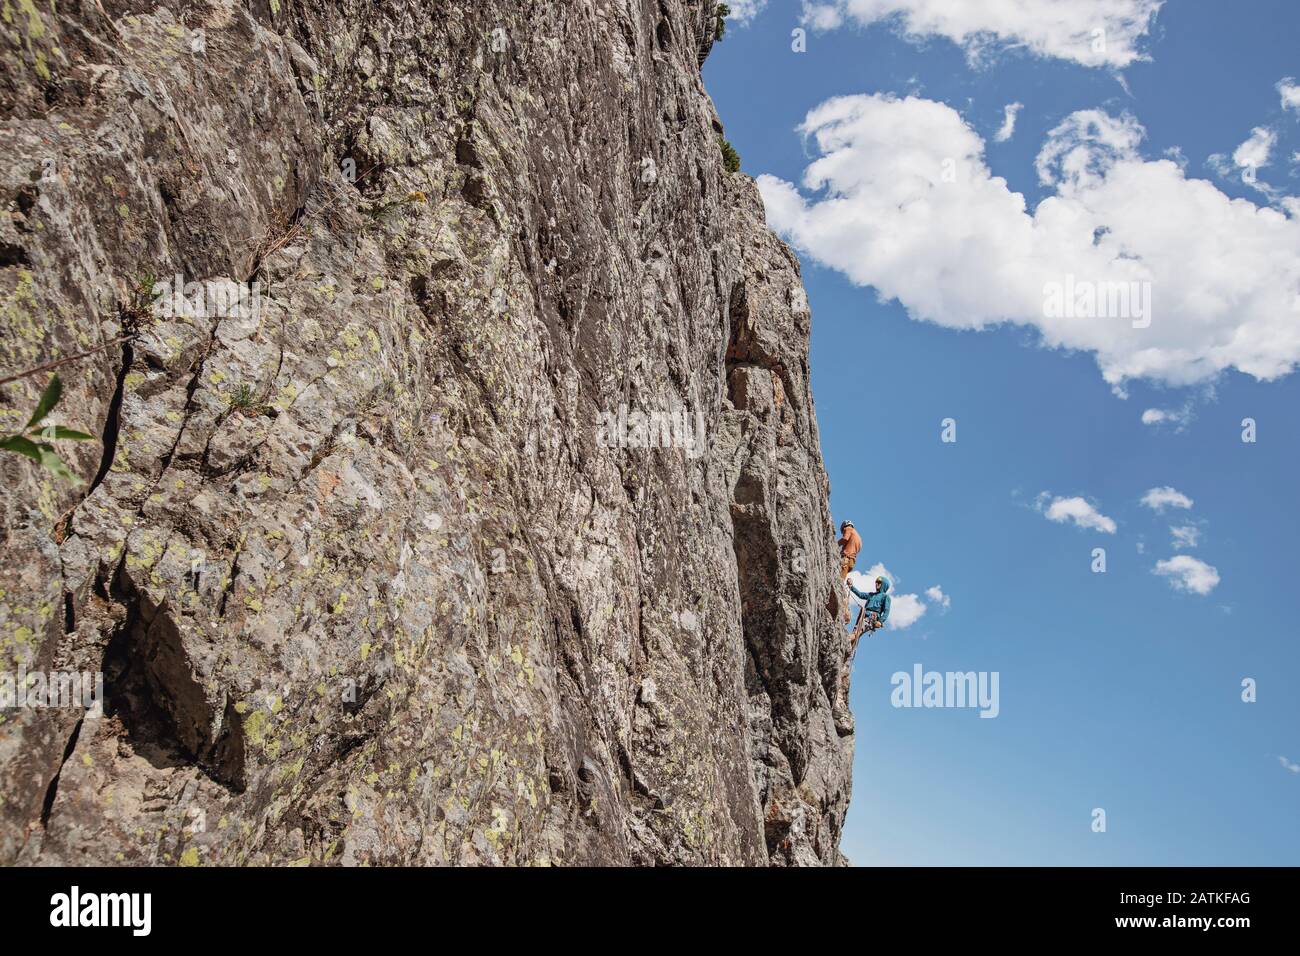 Two people cling to the side of a cliff while rock climbing, Wyoming Stock Photo